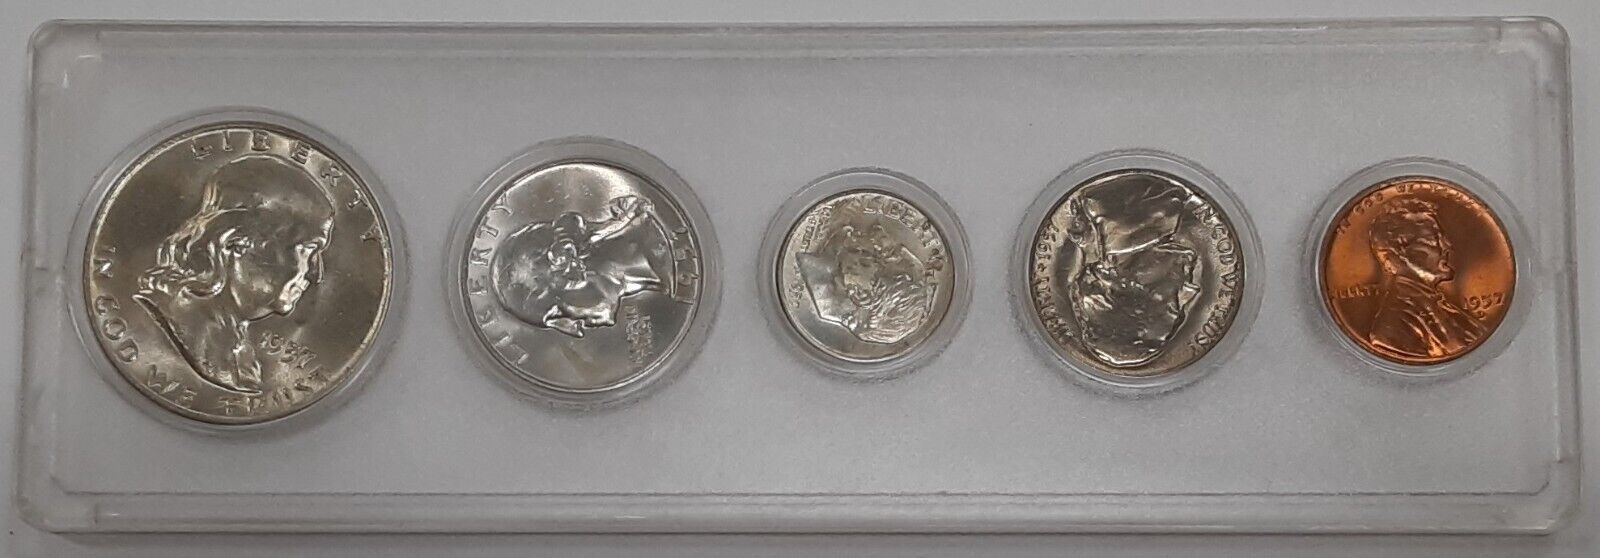 1957-D U.S. 5 Coin Uncirculated Set in Whitman Plastic Holder